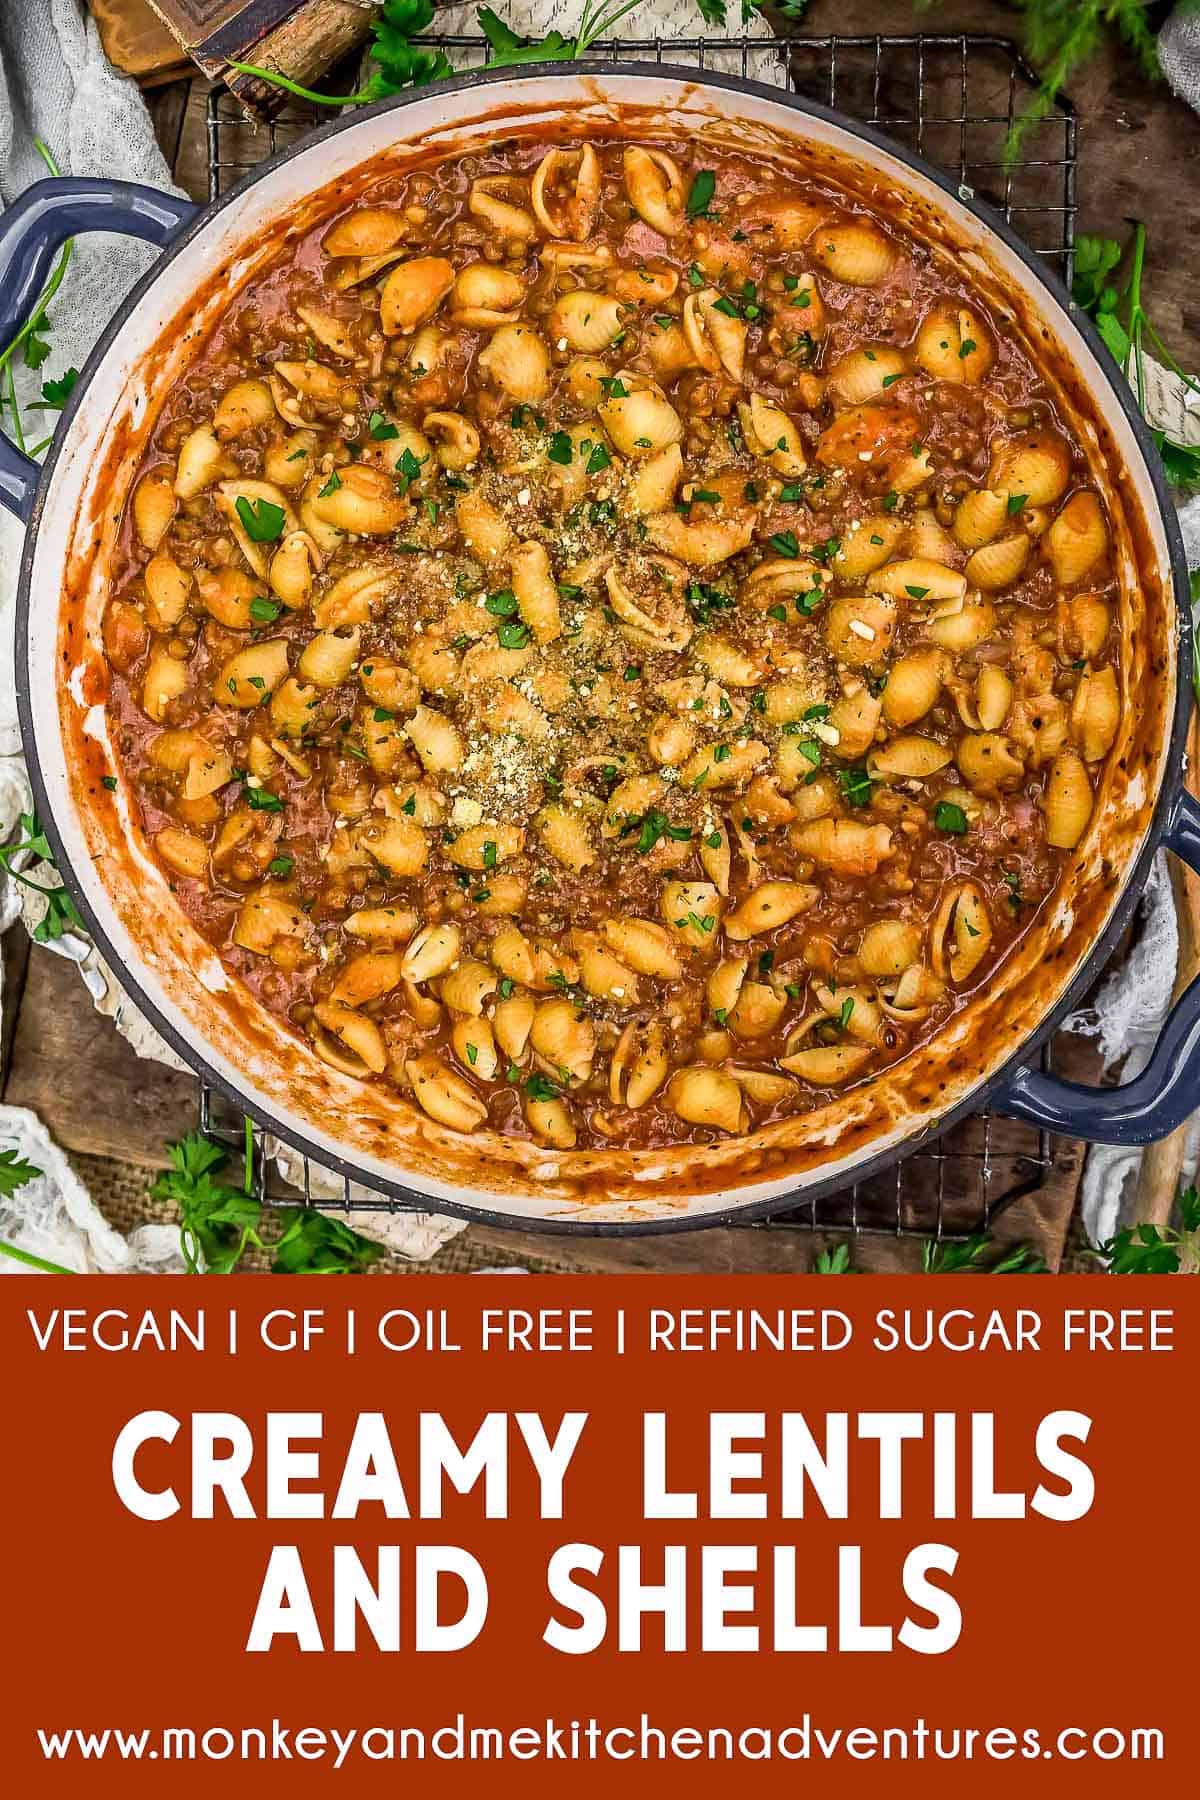 Creamy Lentils and Shells with text description